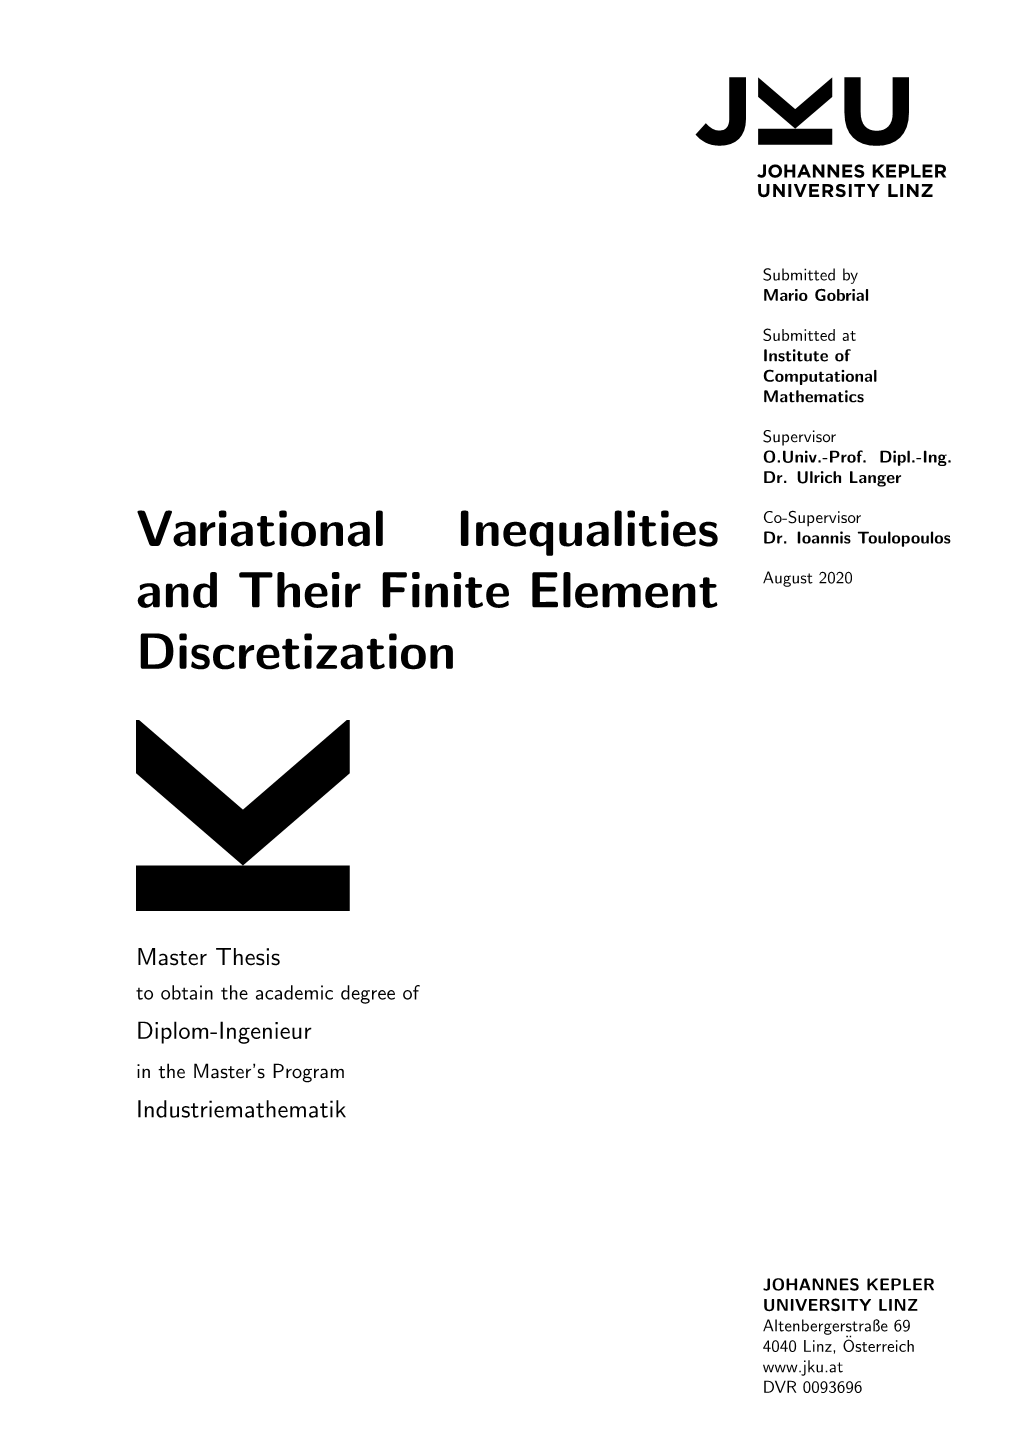 Variational Inequalities and Their Finite Element Discretization